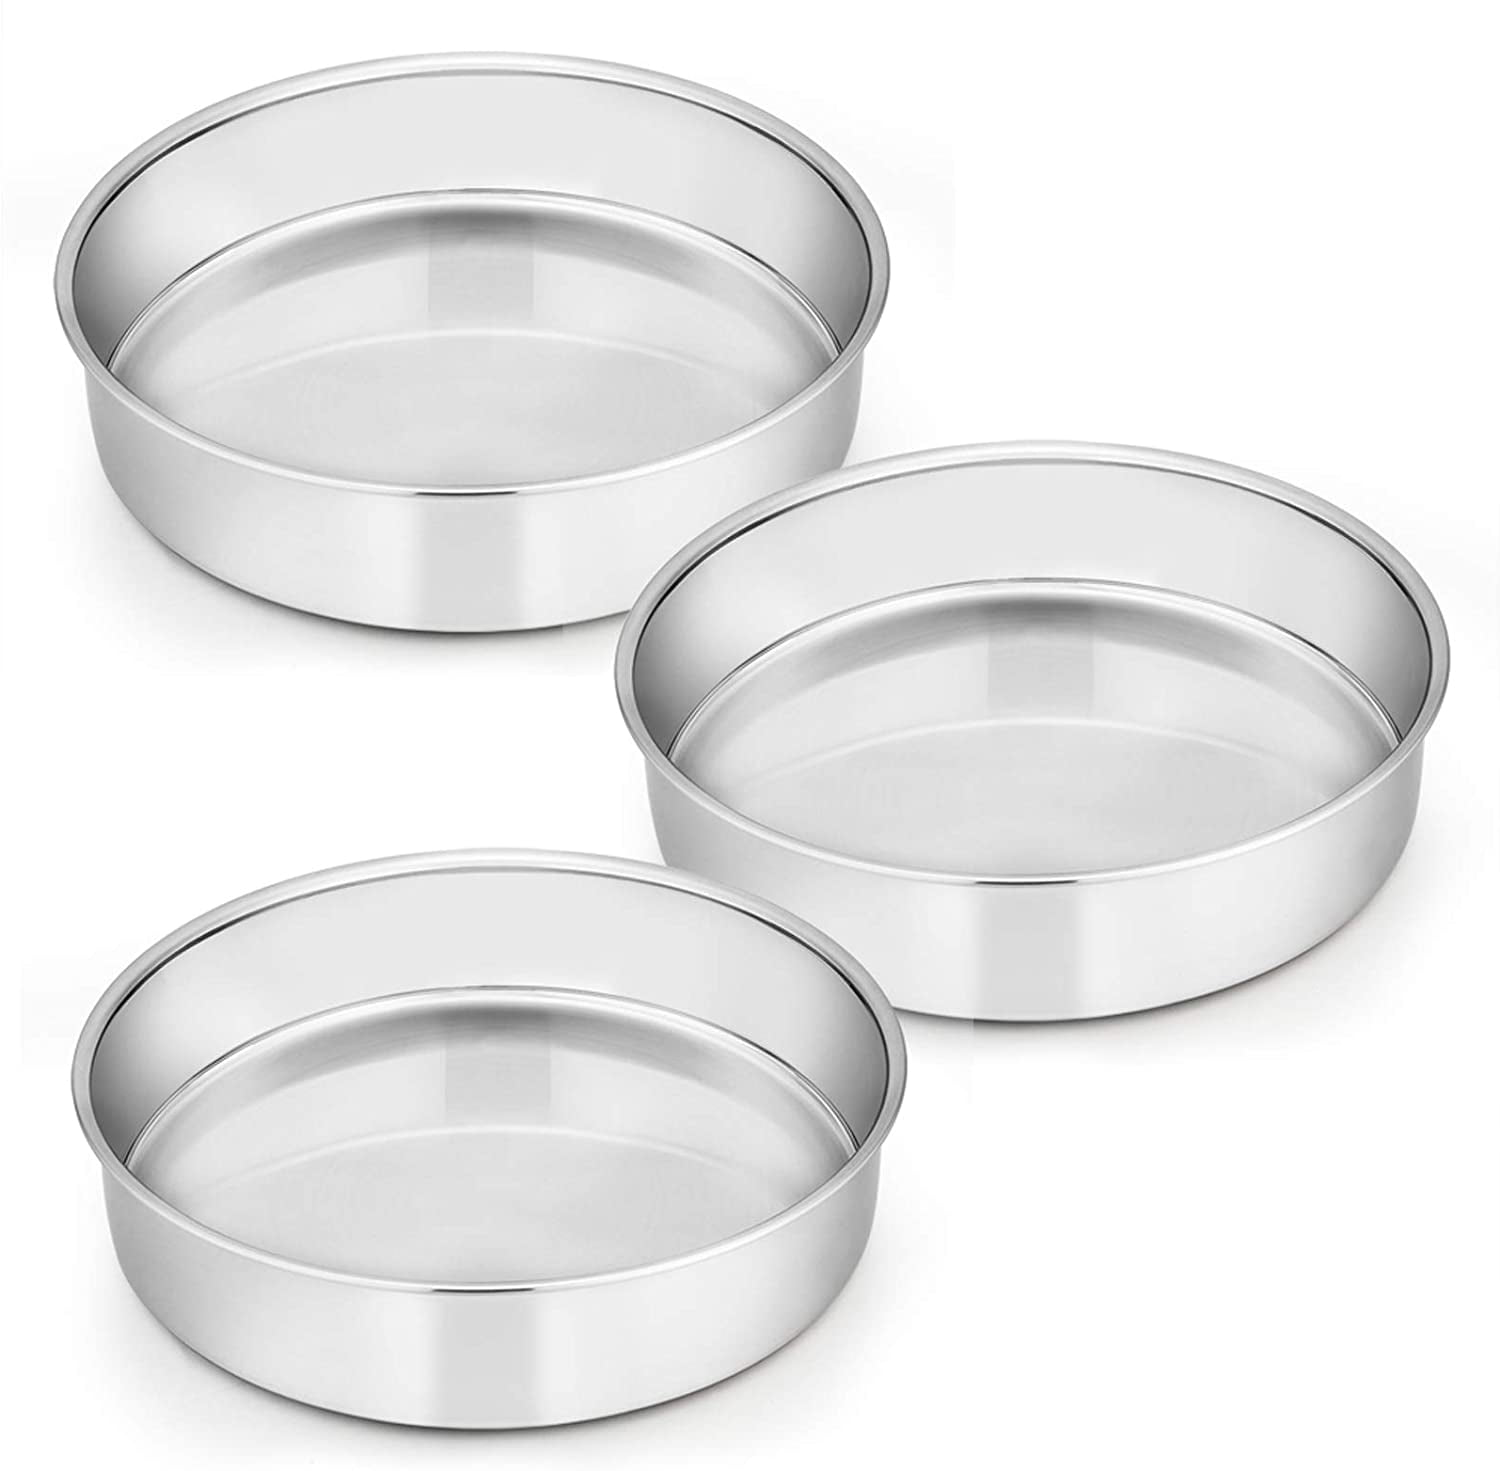 Stainless Steel Tiers Round Baking Cake Pans with Lids TeamFar 8 Inch Cake Pan Mirror Polish & Smooth Edge Healthy & Heavy Duty Dishwasher Safe & Easy Clean 2 Pans + 2 Lids Set of 4 